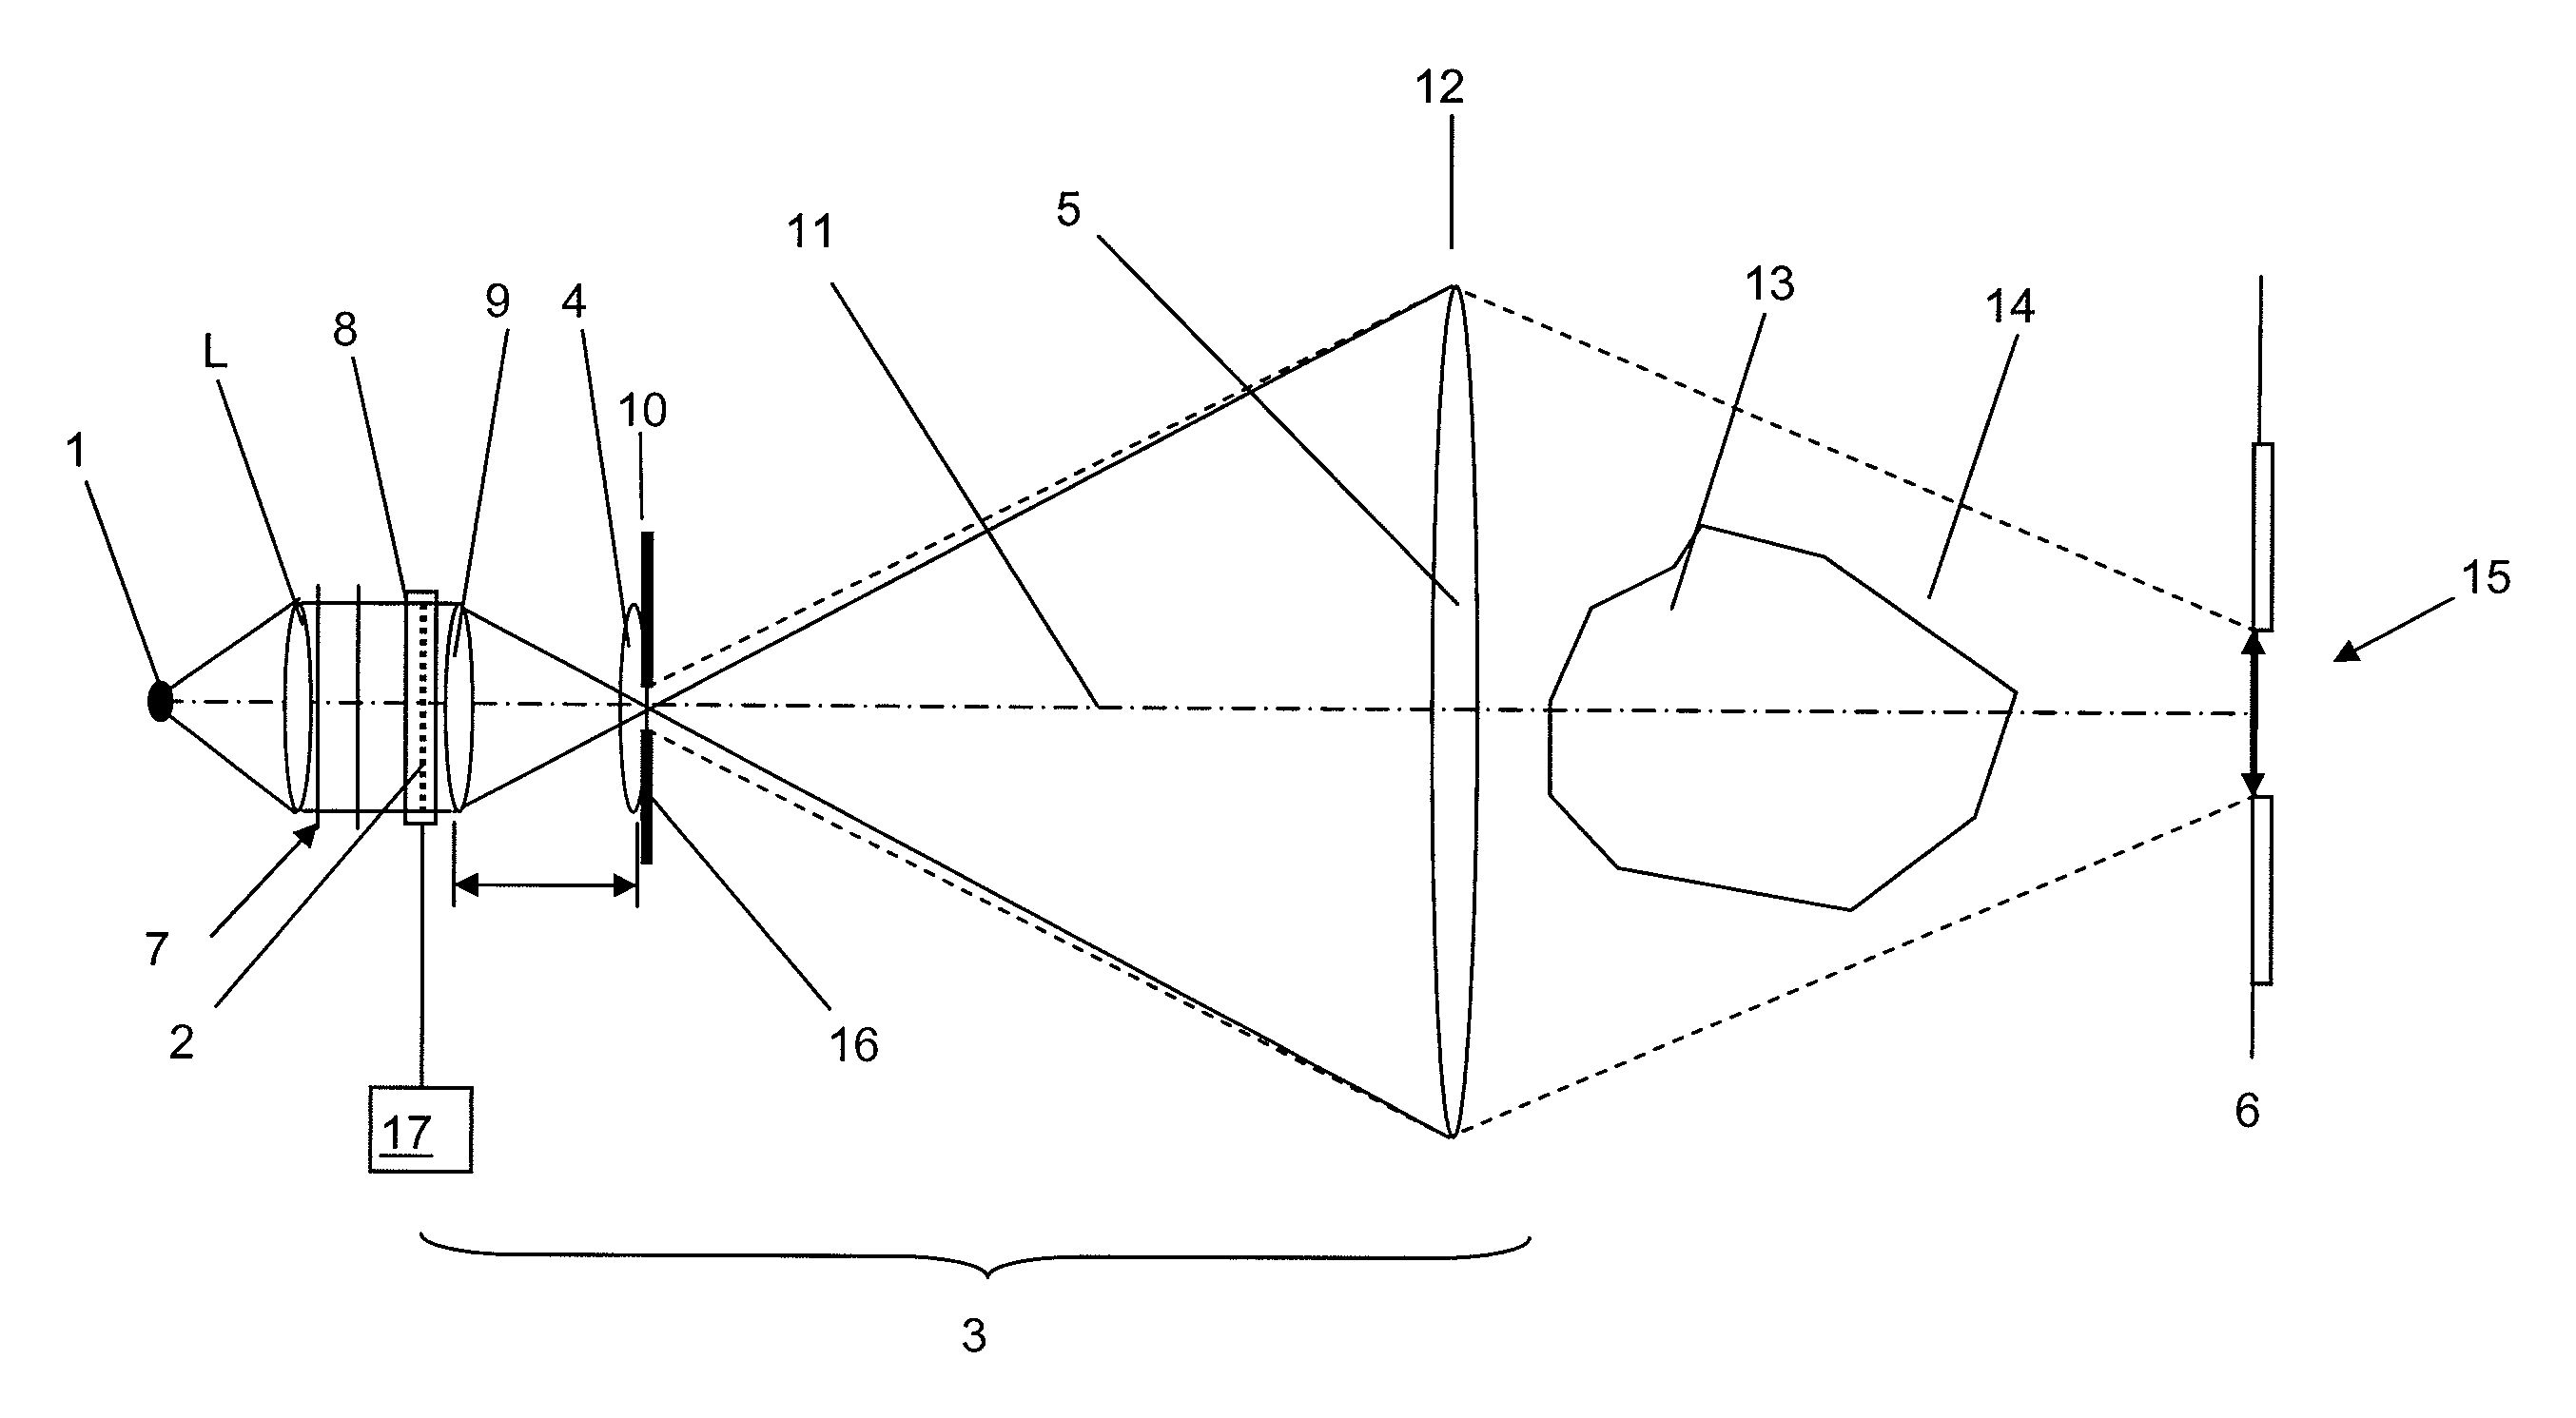 Projection device and method for holographic reconstruction of scenes